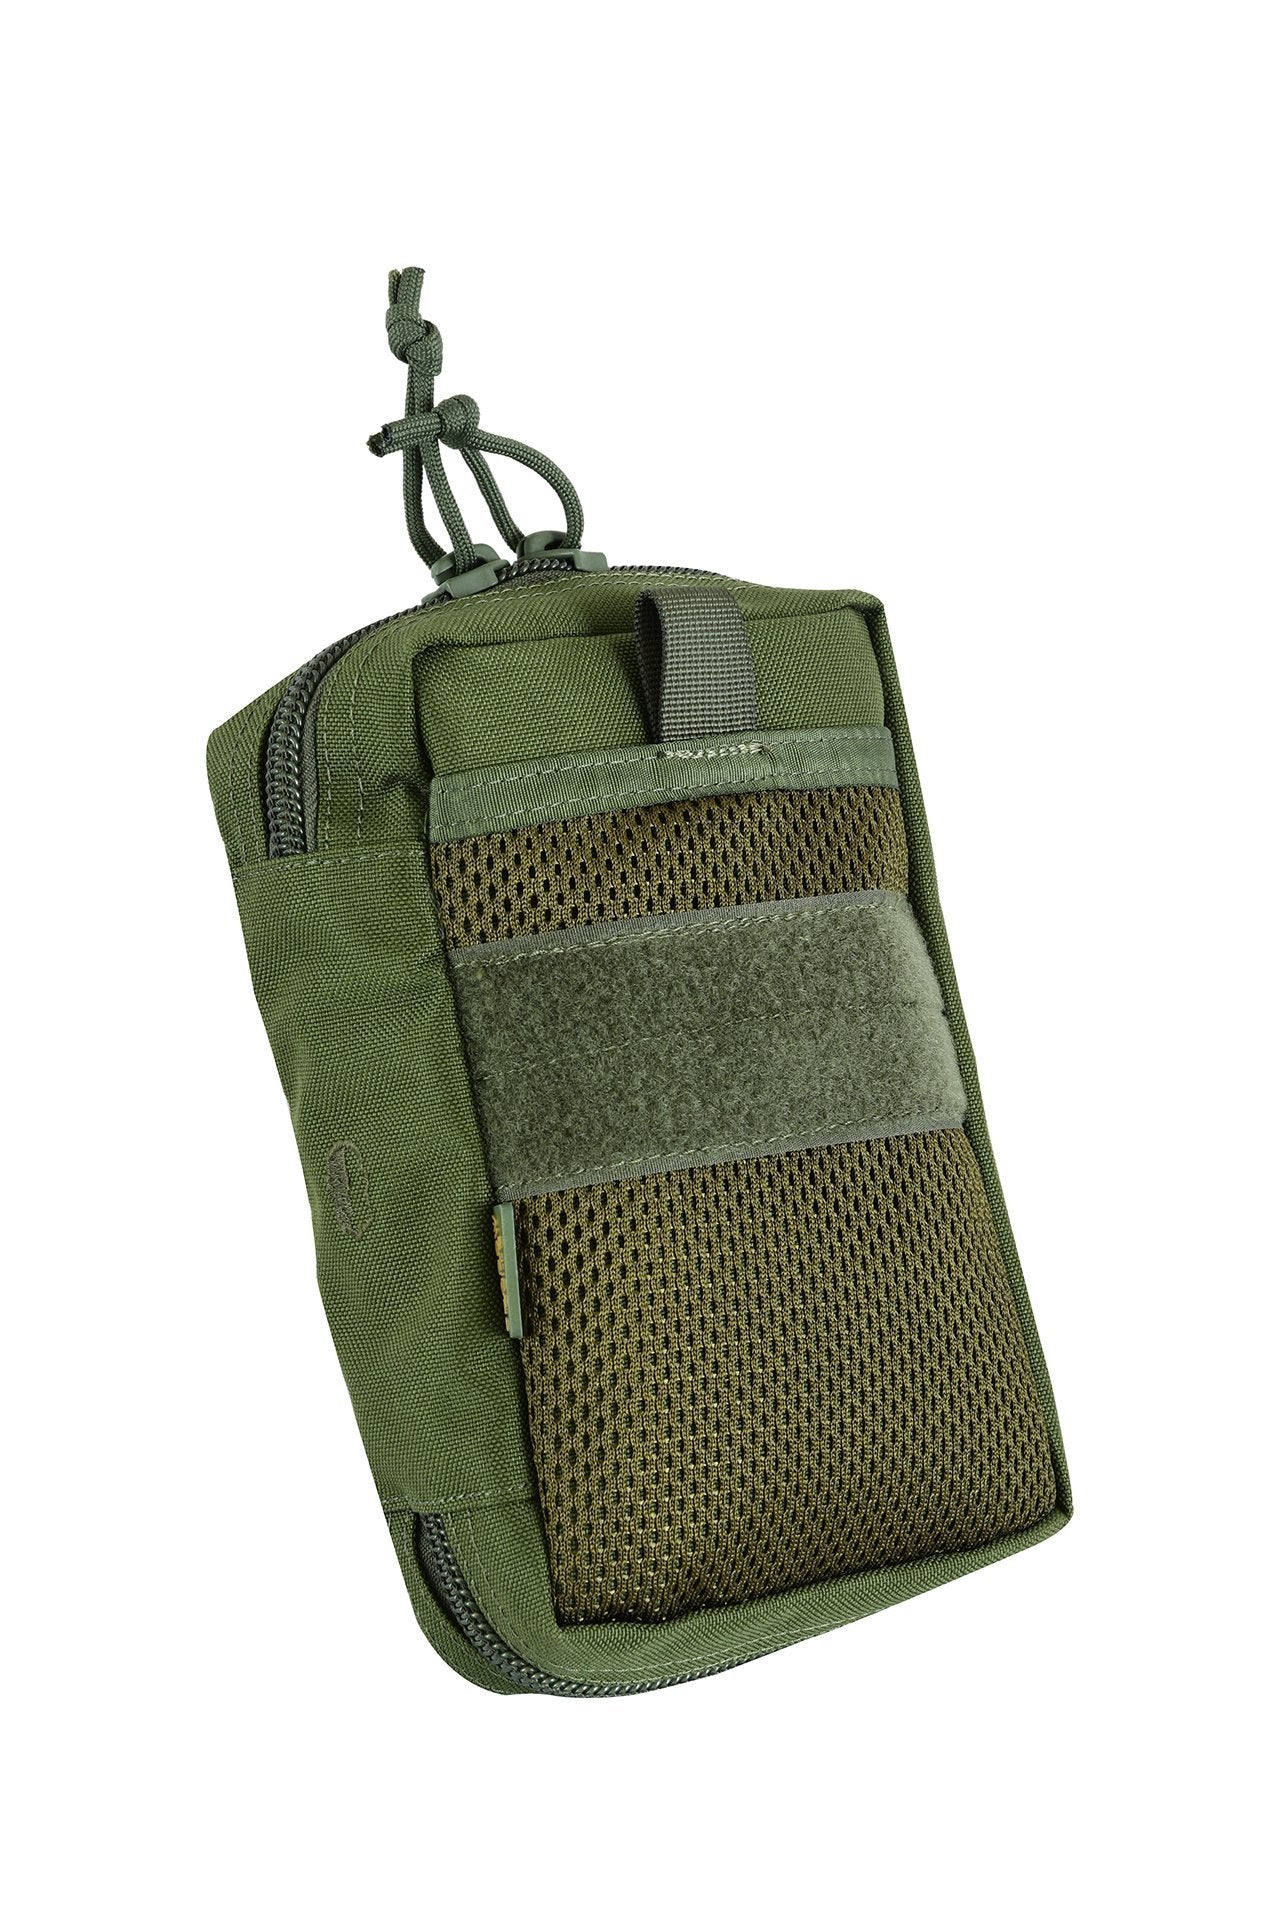 Shadow Strategic Compact EDC Camouflage  Pouch Colour Olive Green side view.